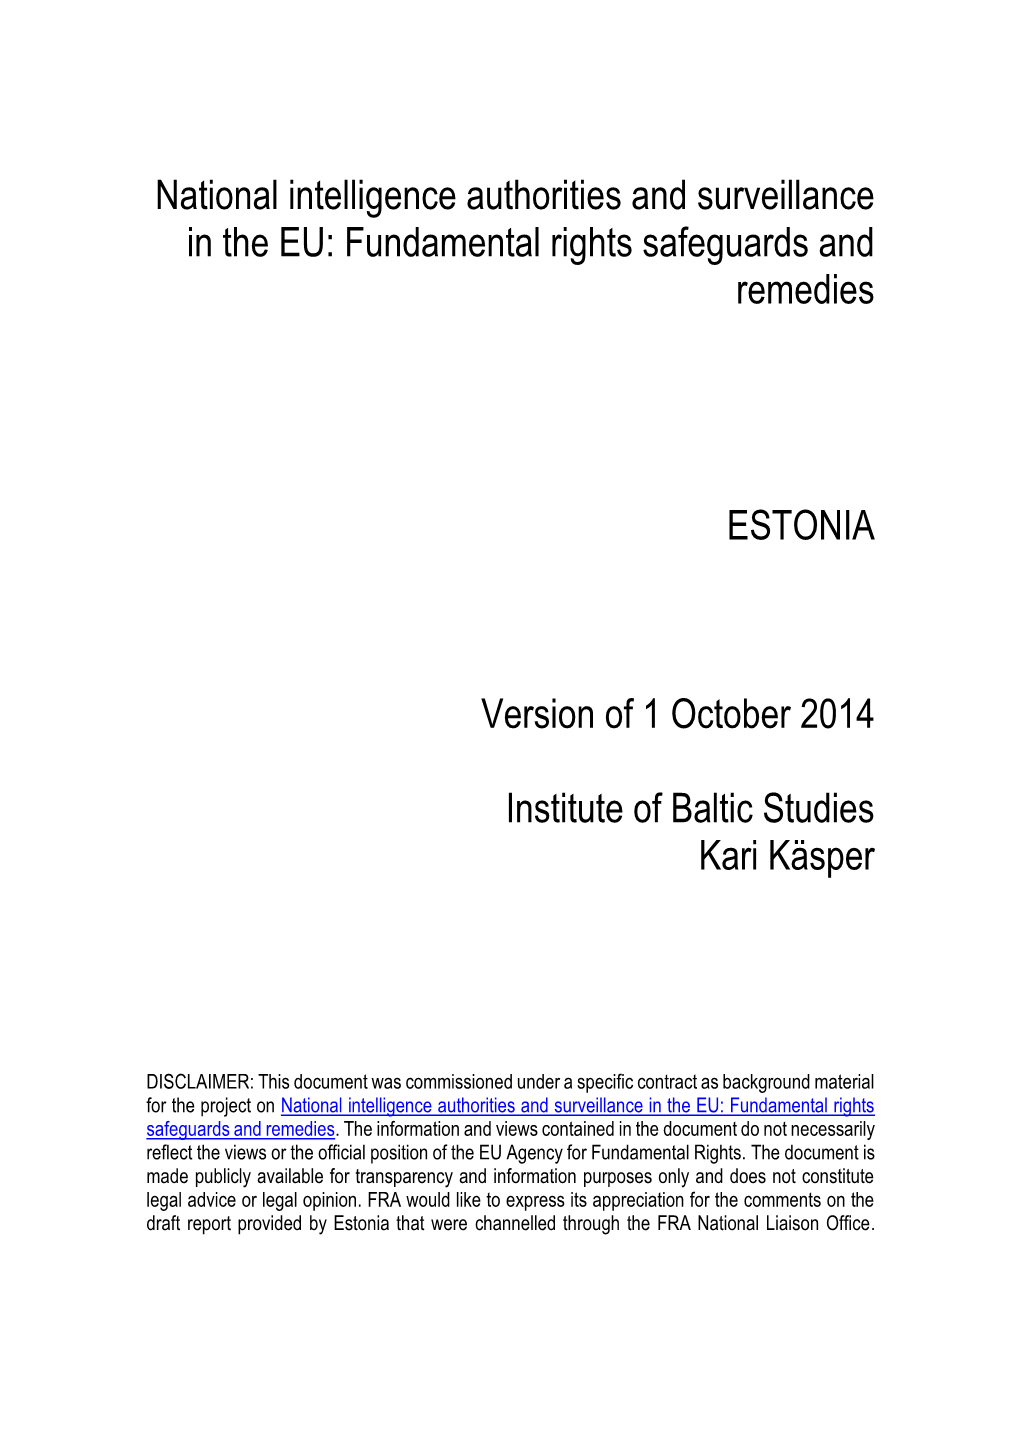 National Intelligence Authorities and Surveillance in the EU: Fundamental Rights Safeguards and Remedies